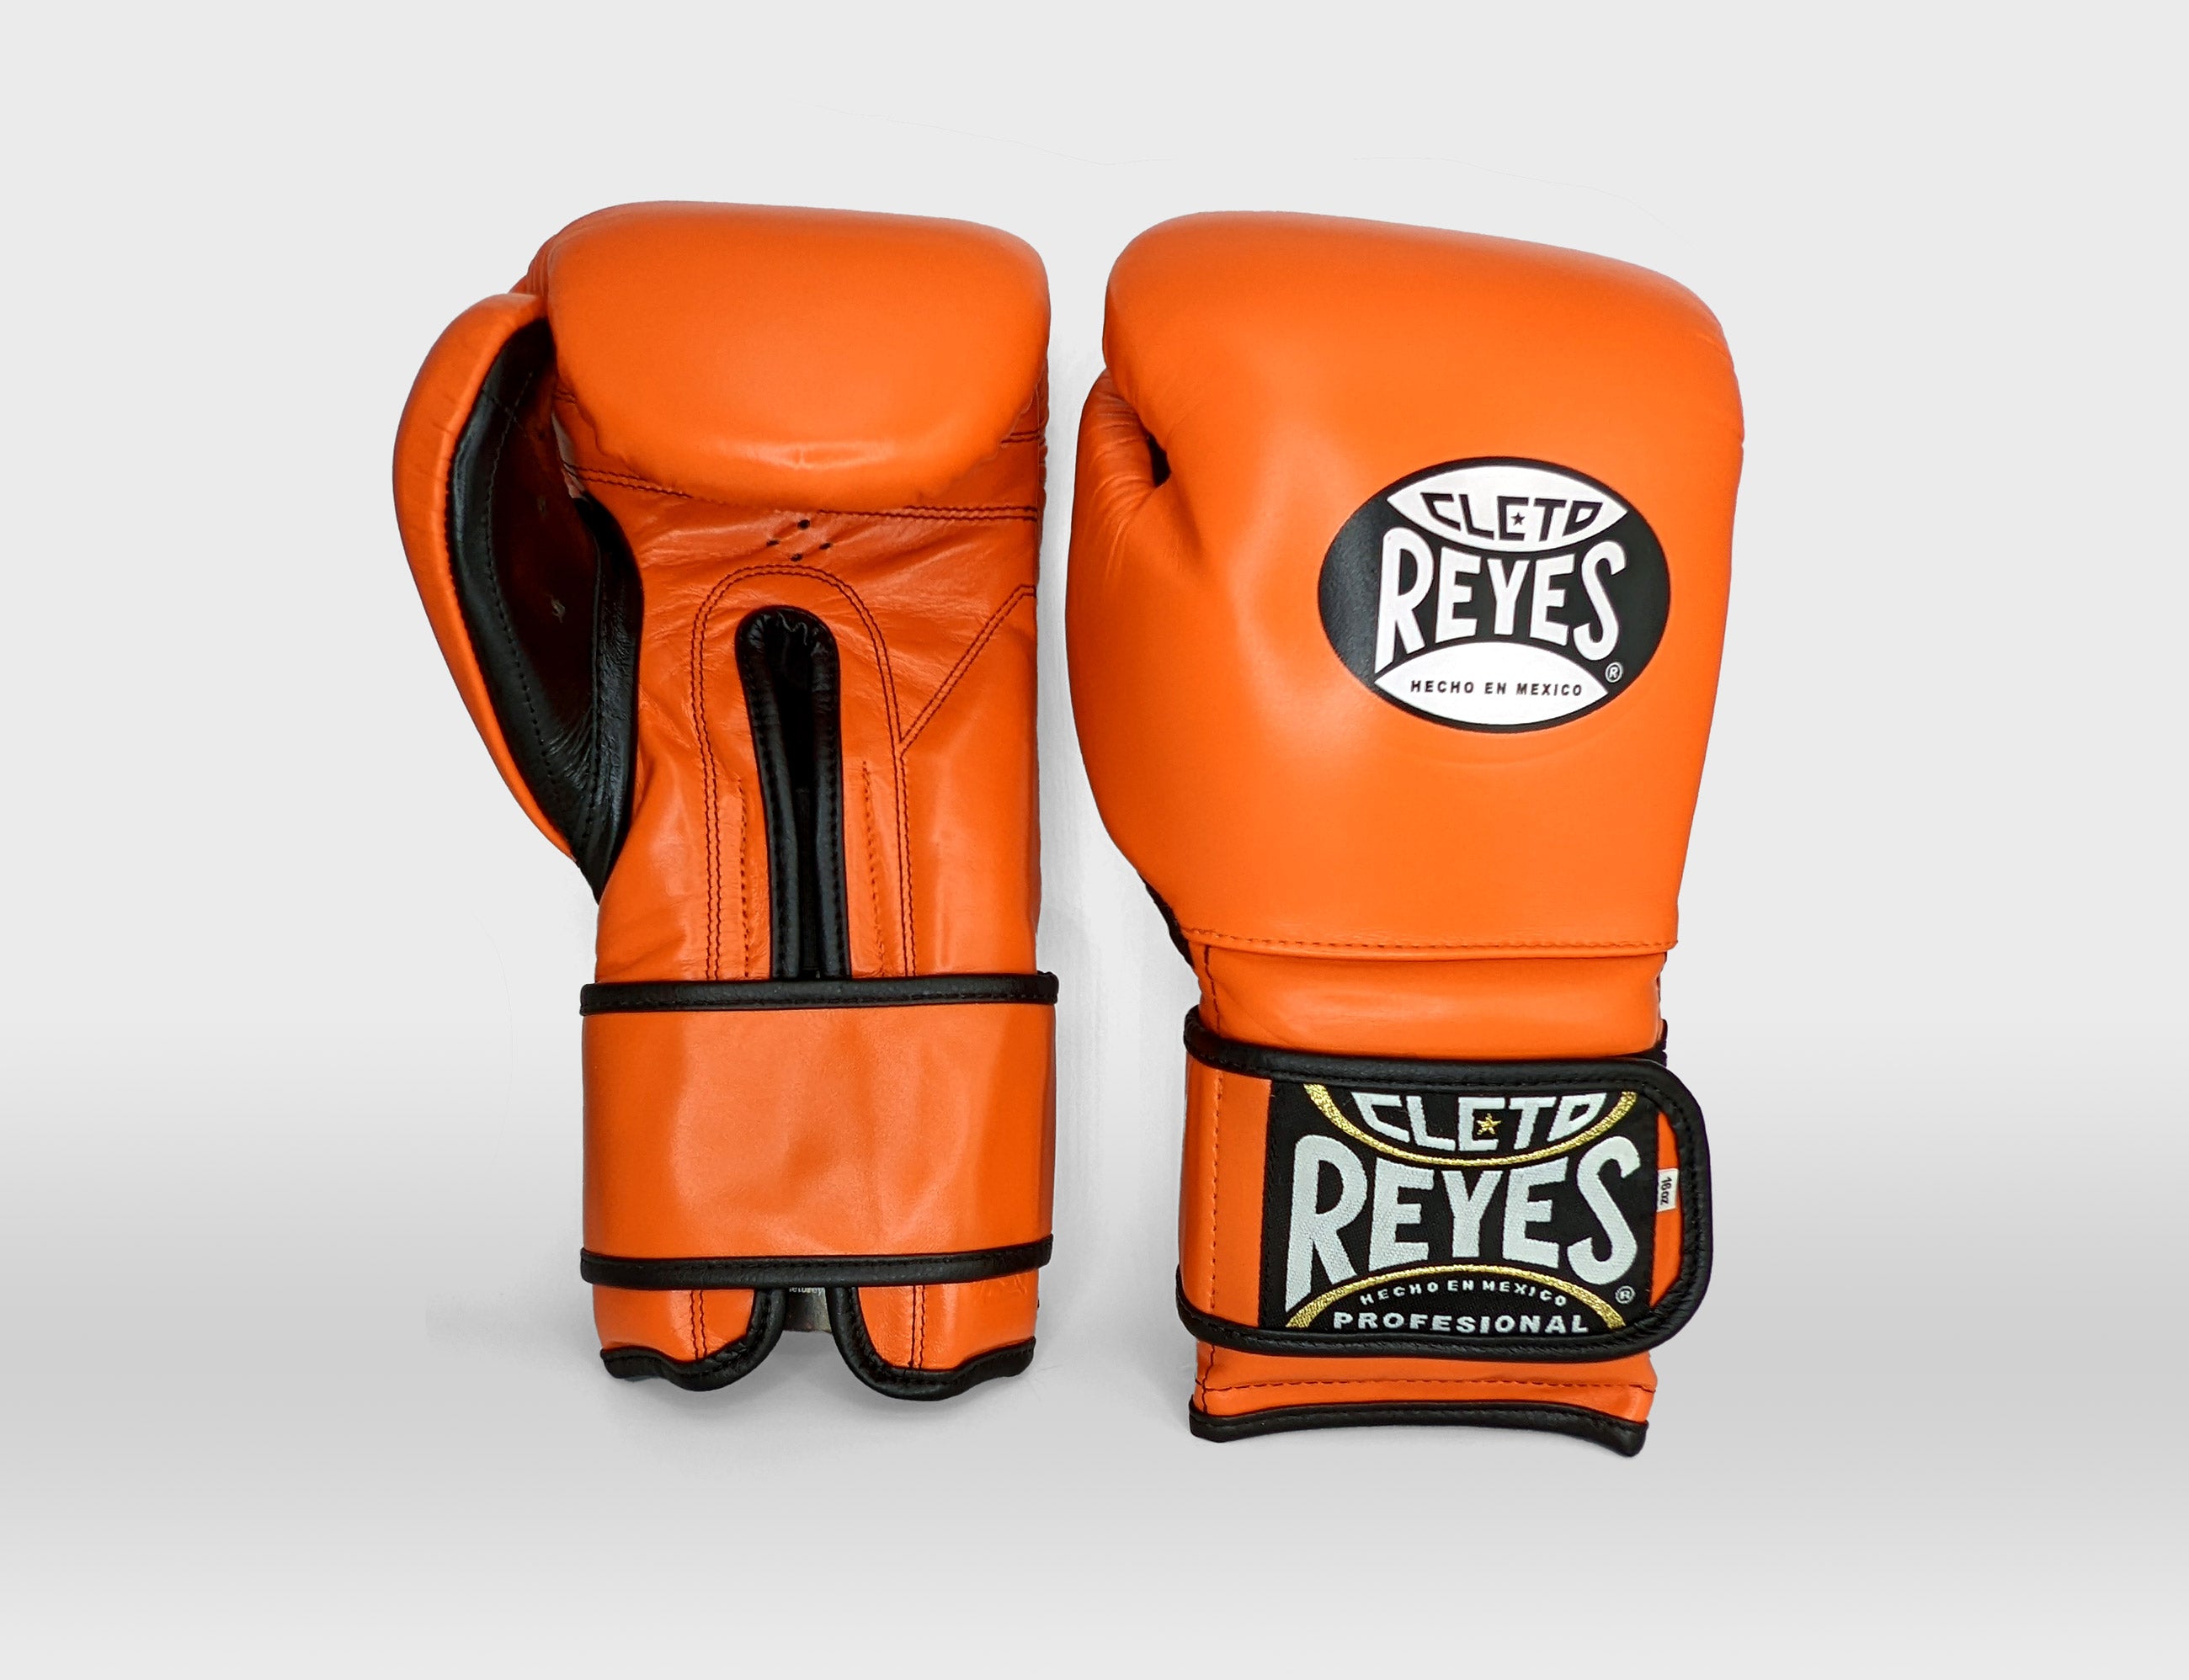 Orange Cleto Reyes Hook and Loop Training Gloves Available For Sale At ATL Fight Shop for $179.99